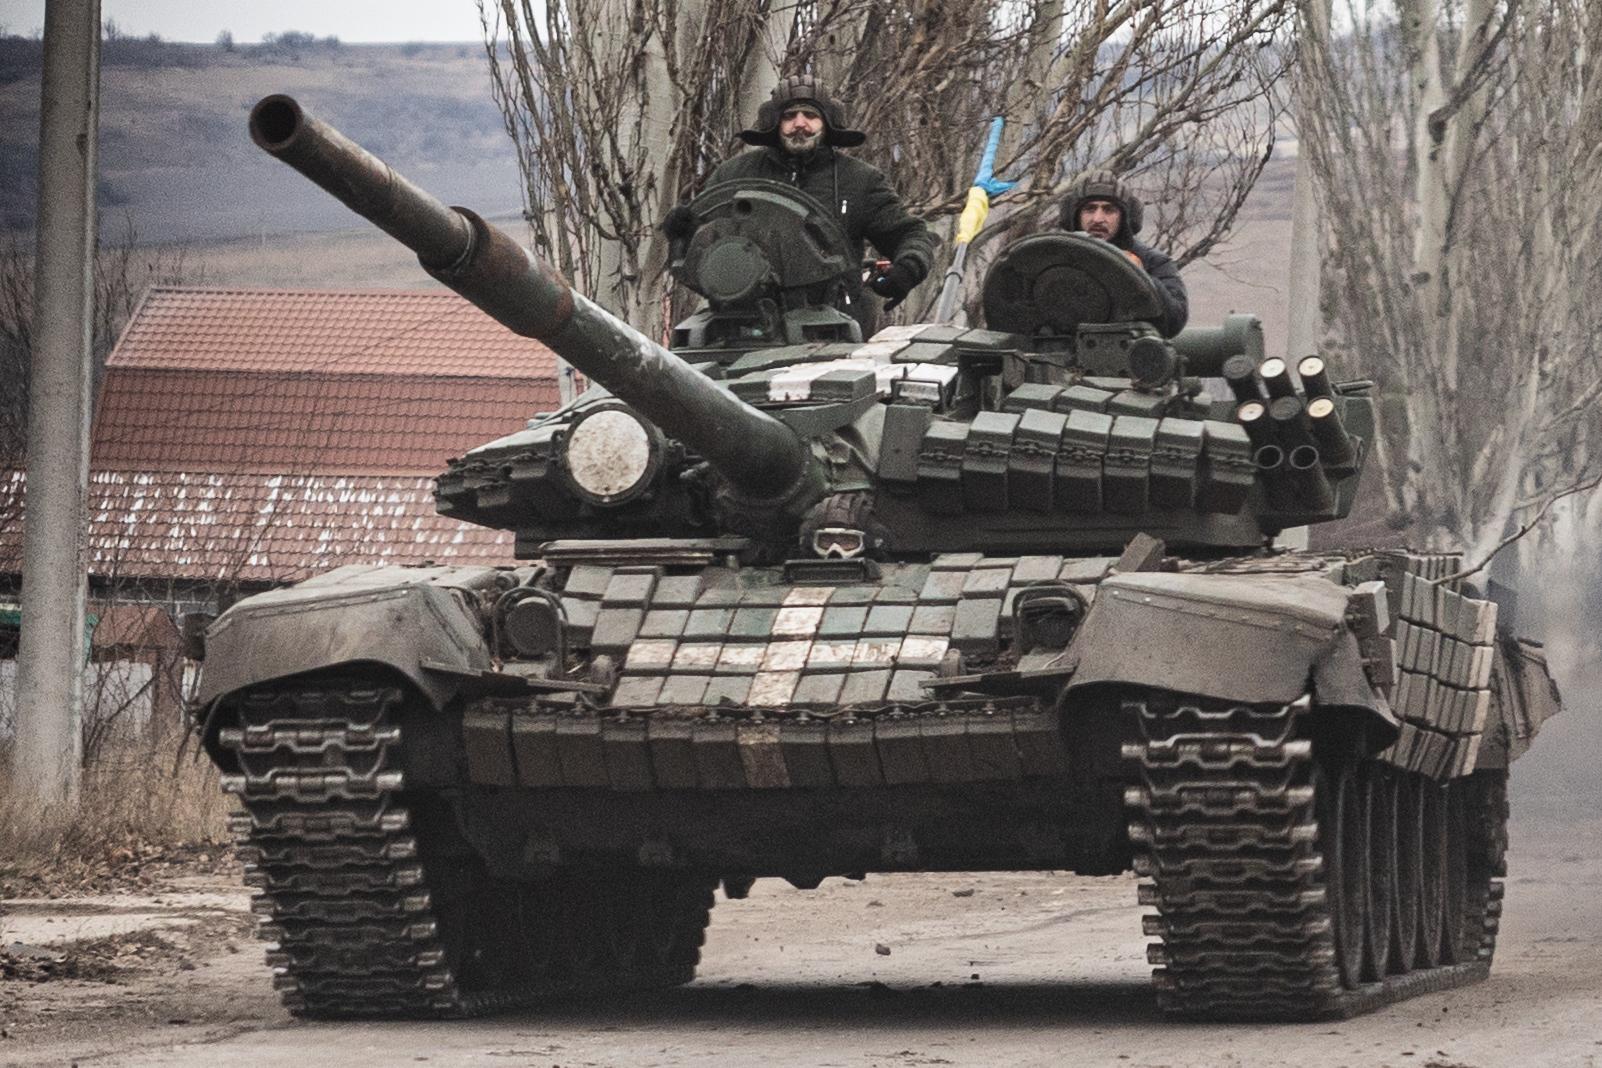 Ukrainian armed forces' soldiers drive a T-72 tank on the outskirts of Bakhmut, eastern Ukraine on December 21, 2022. - For civilians trying to survive in the hell of Bakhmut, the visit of Ukrainian President Volodymyr Zelensky on December 20, 2022 was a non-event. But it boosted the morale of soldiers engaged in one of the most violent battles on the front line. (Photo by Sameer Al-DOUMY / AFP)